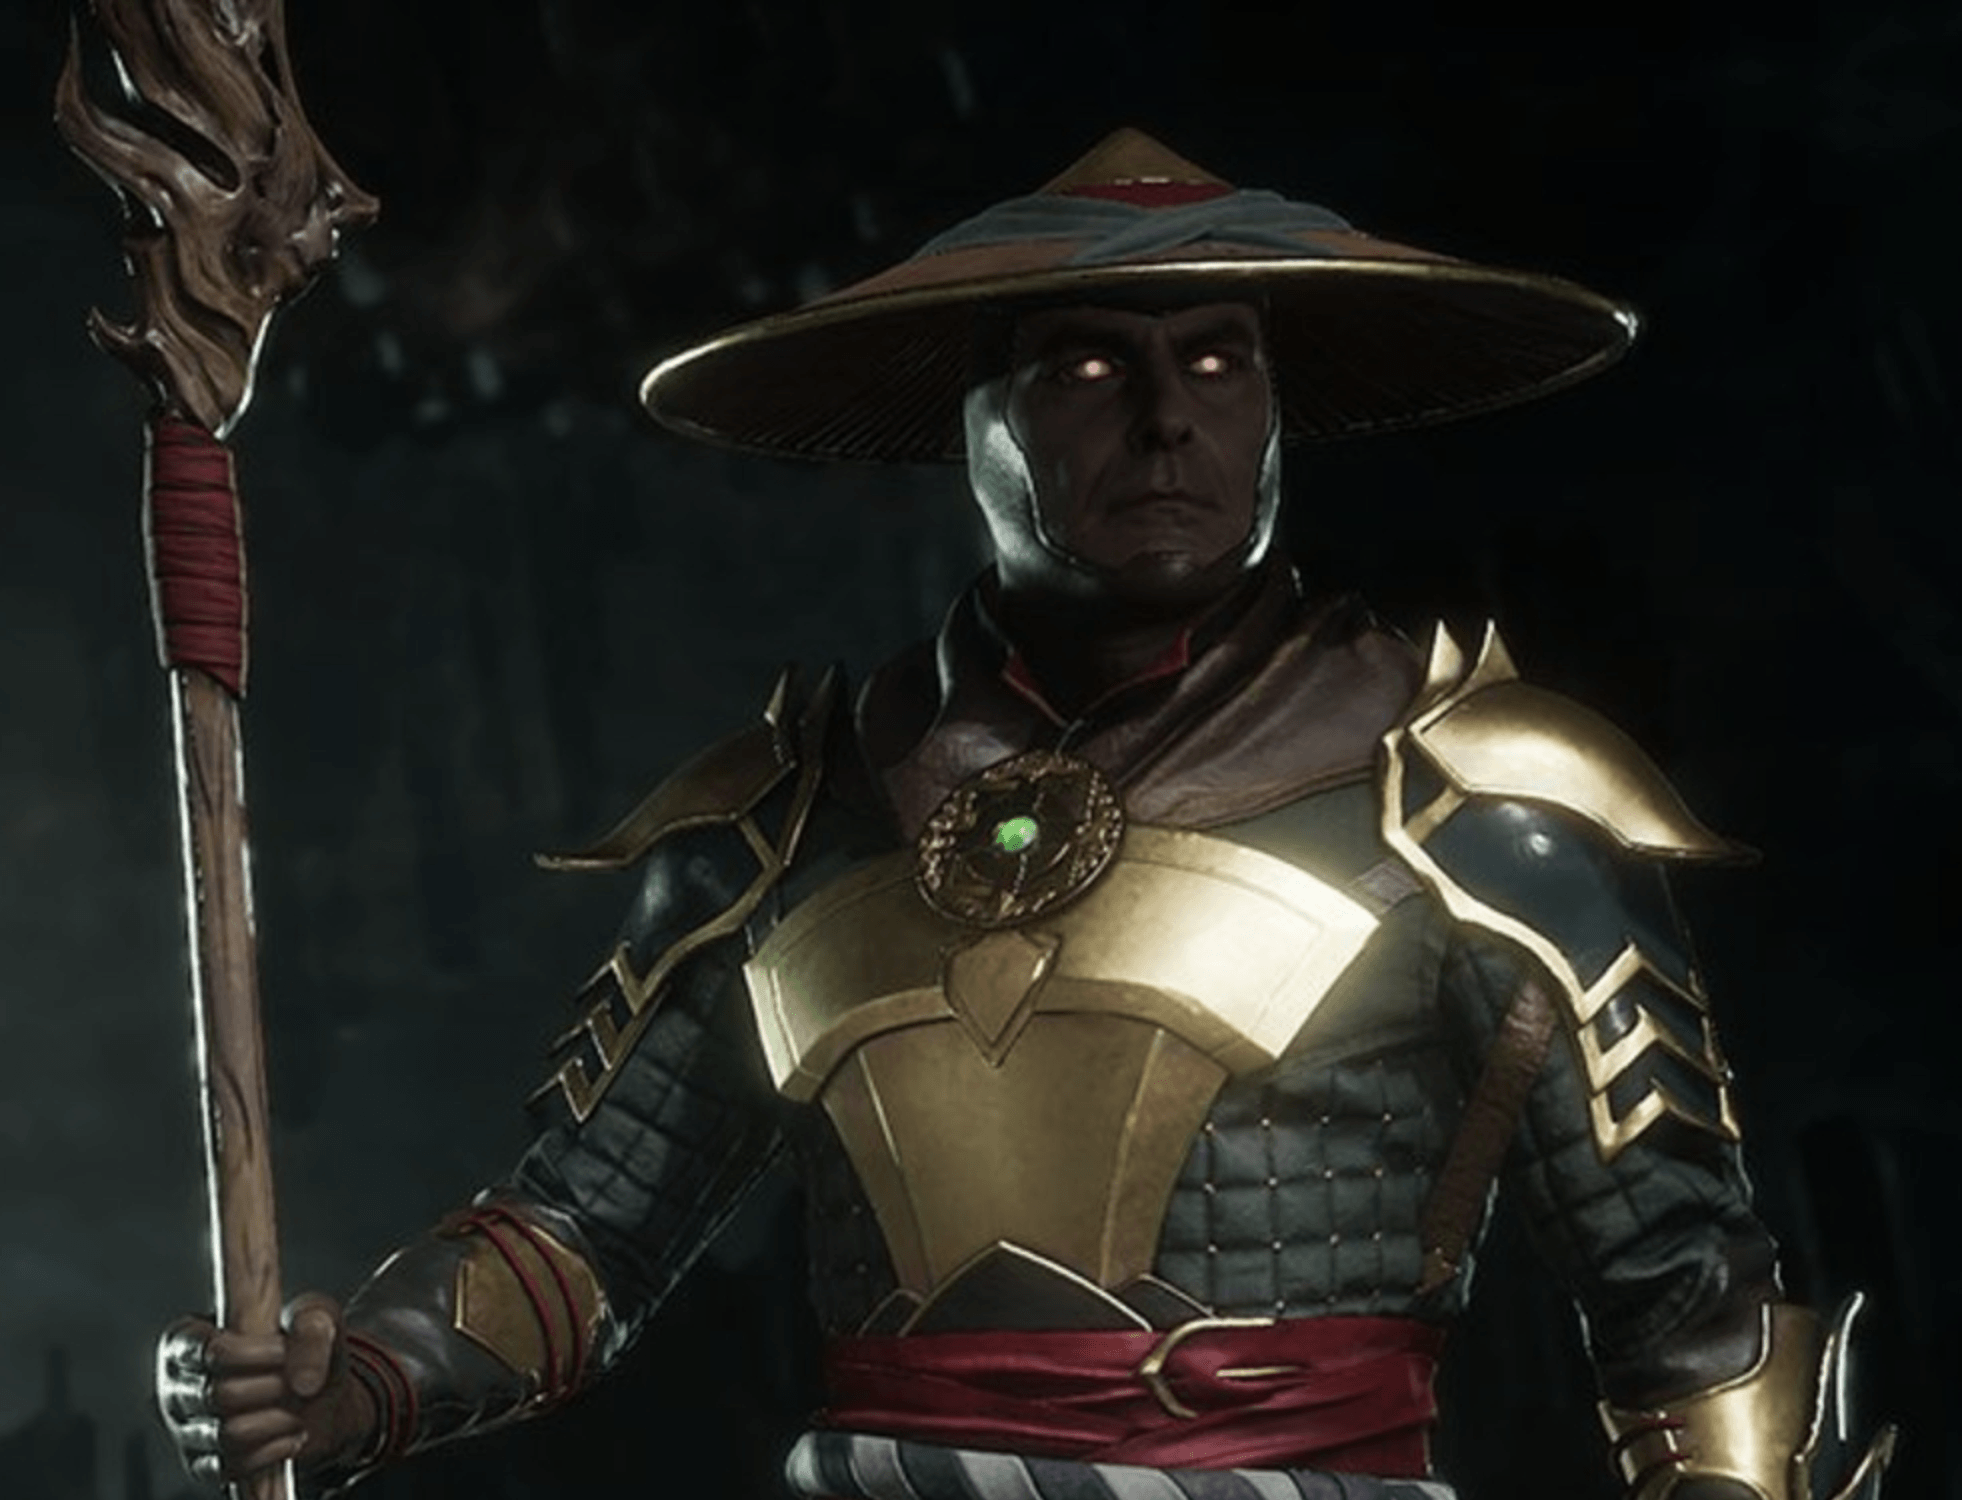 Raiden screenshots, image and picture